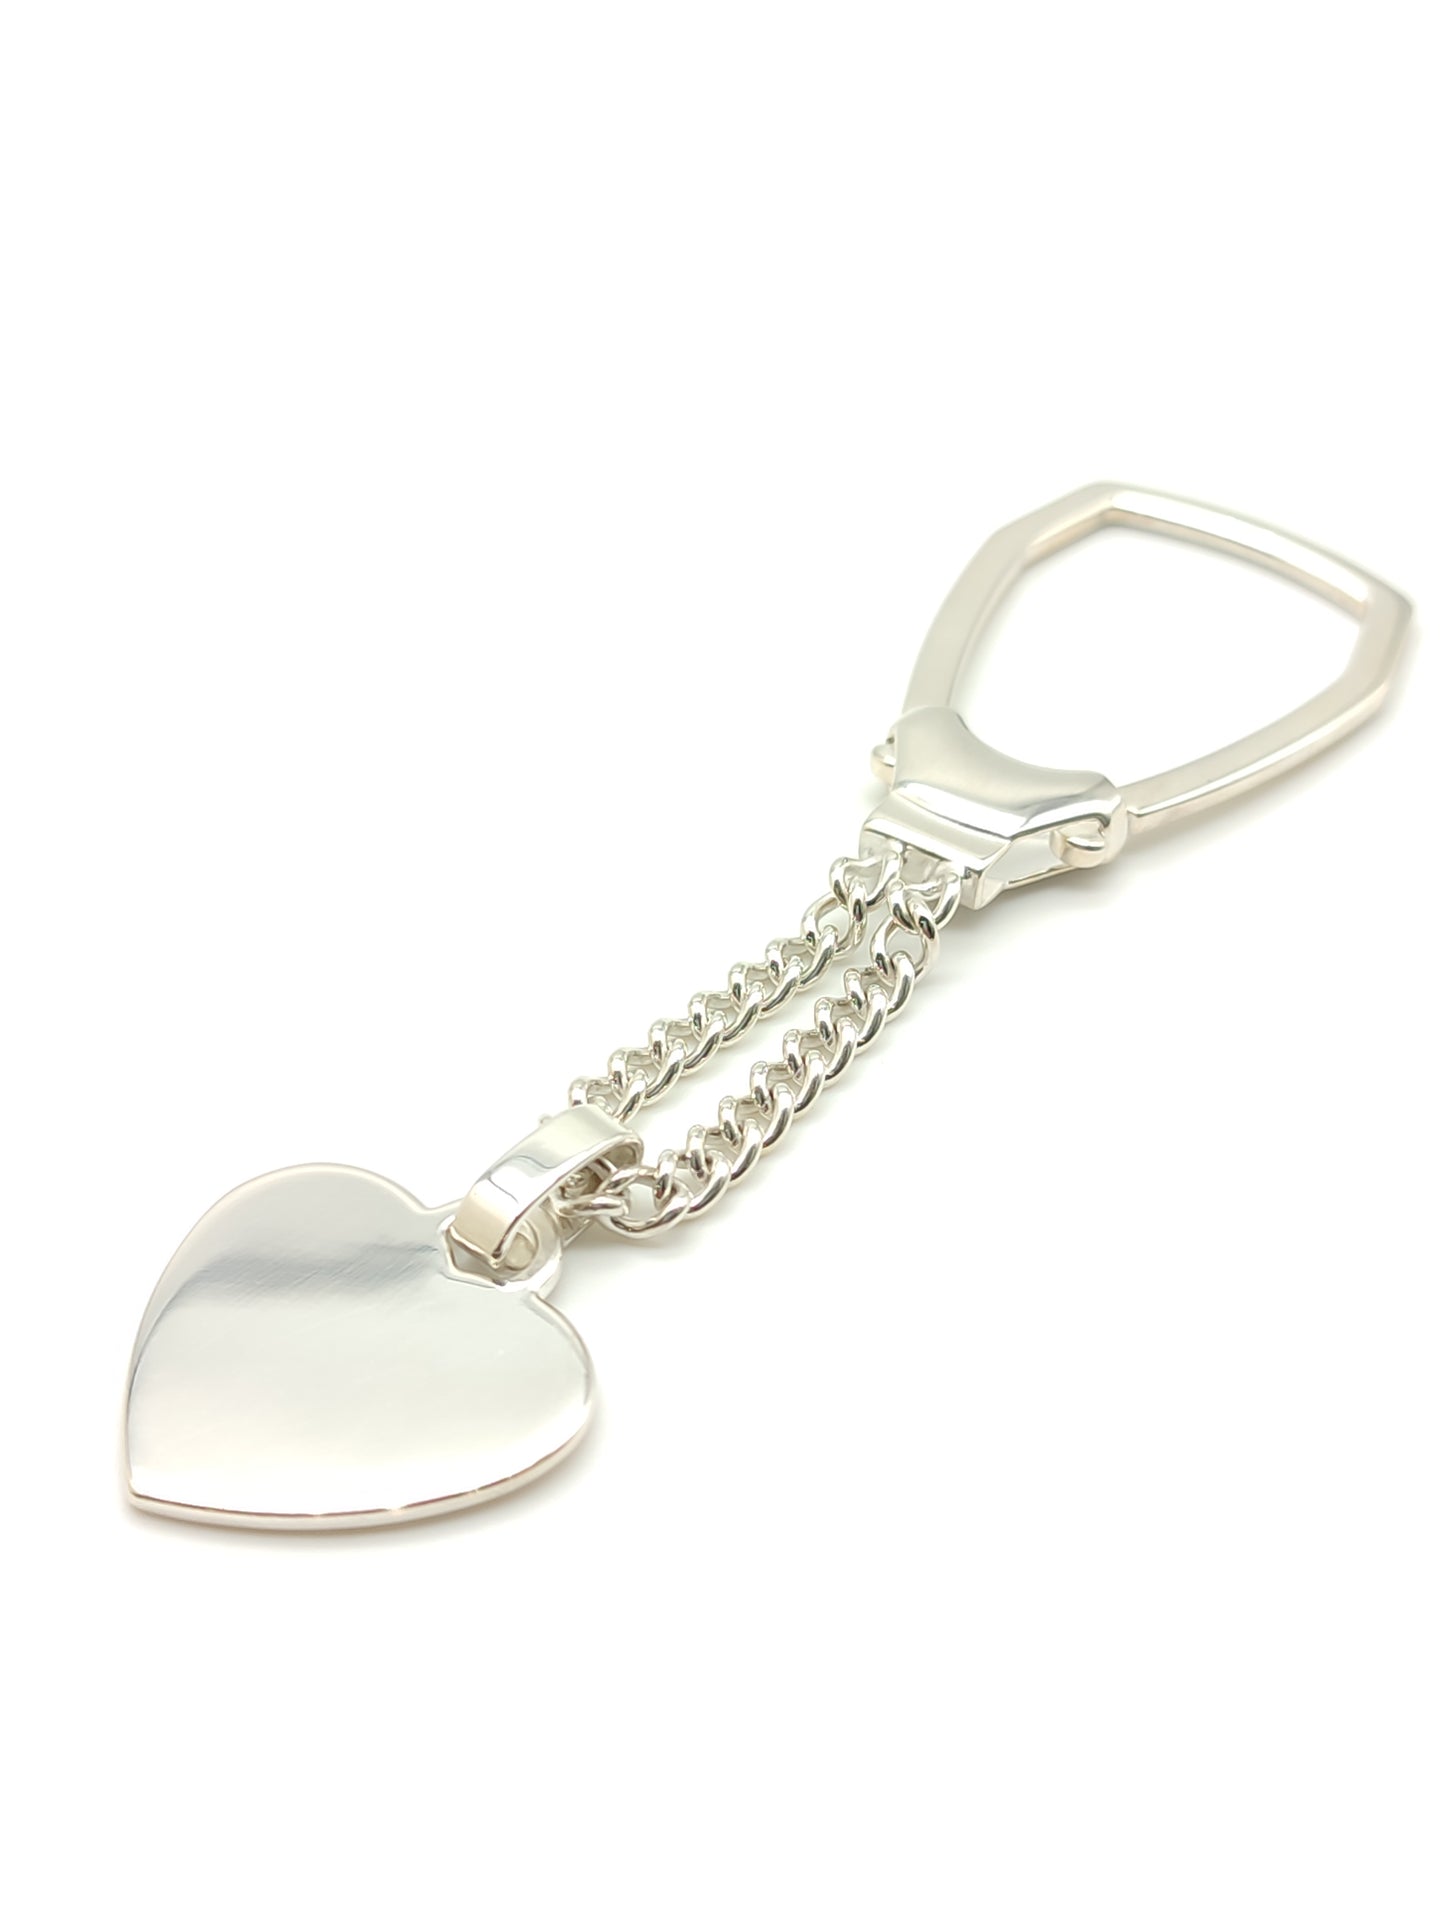 Silver key ring with heart